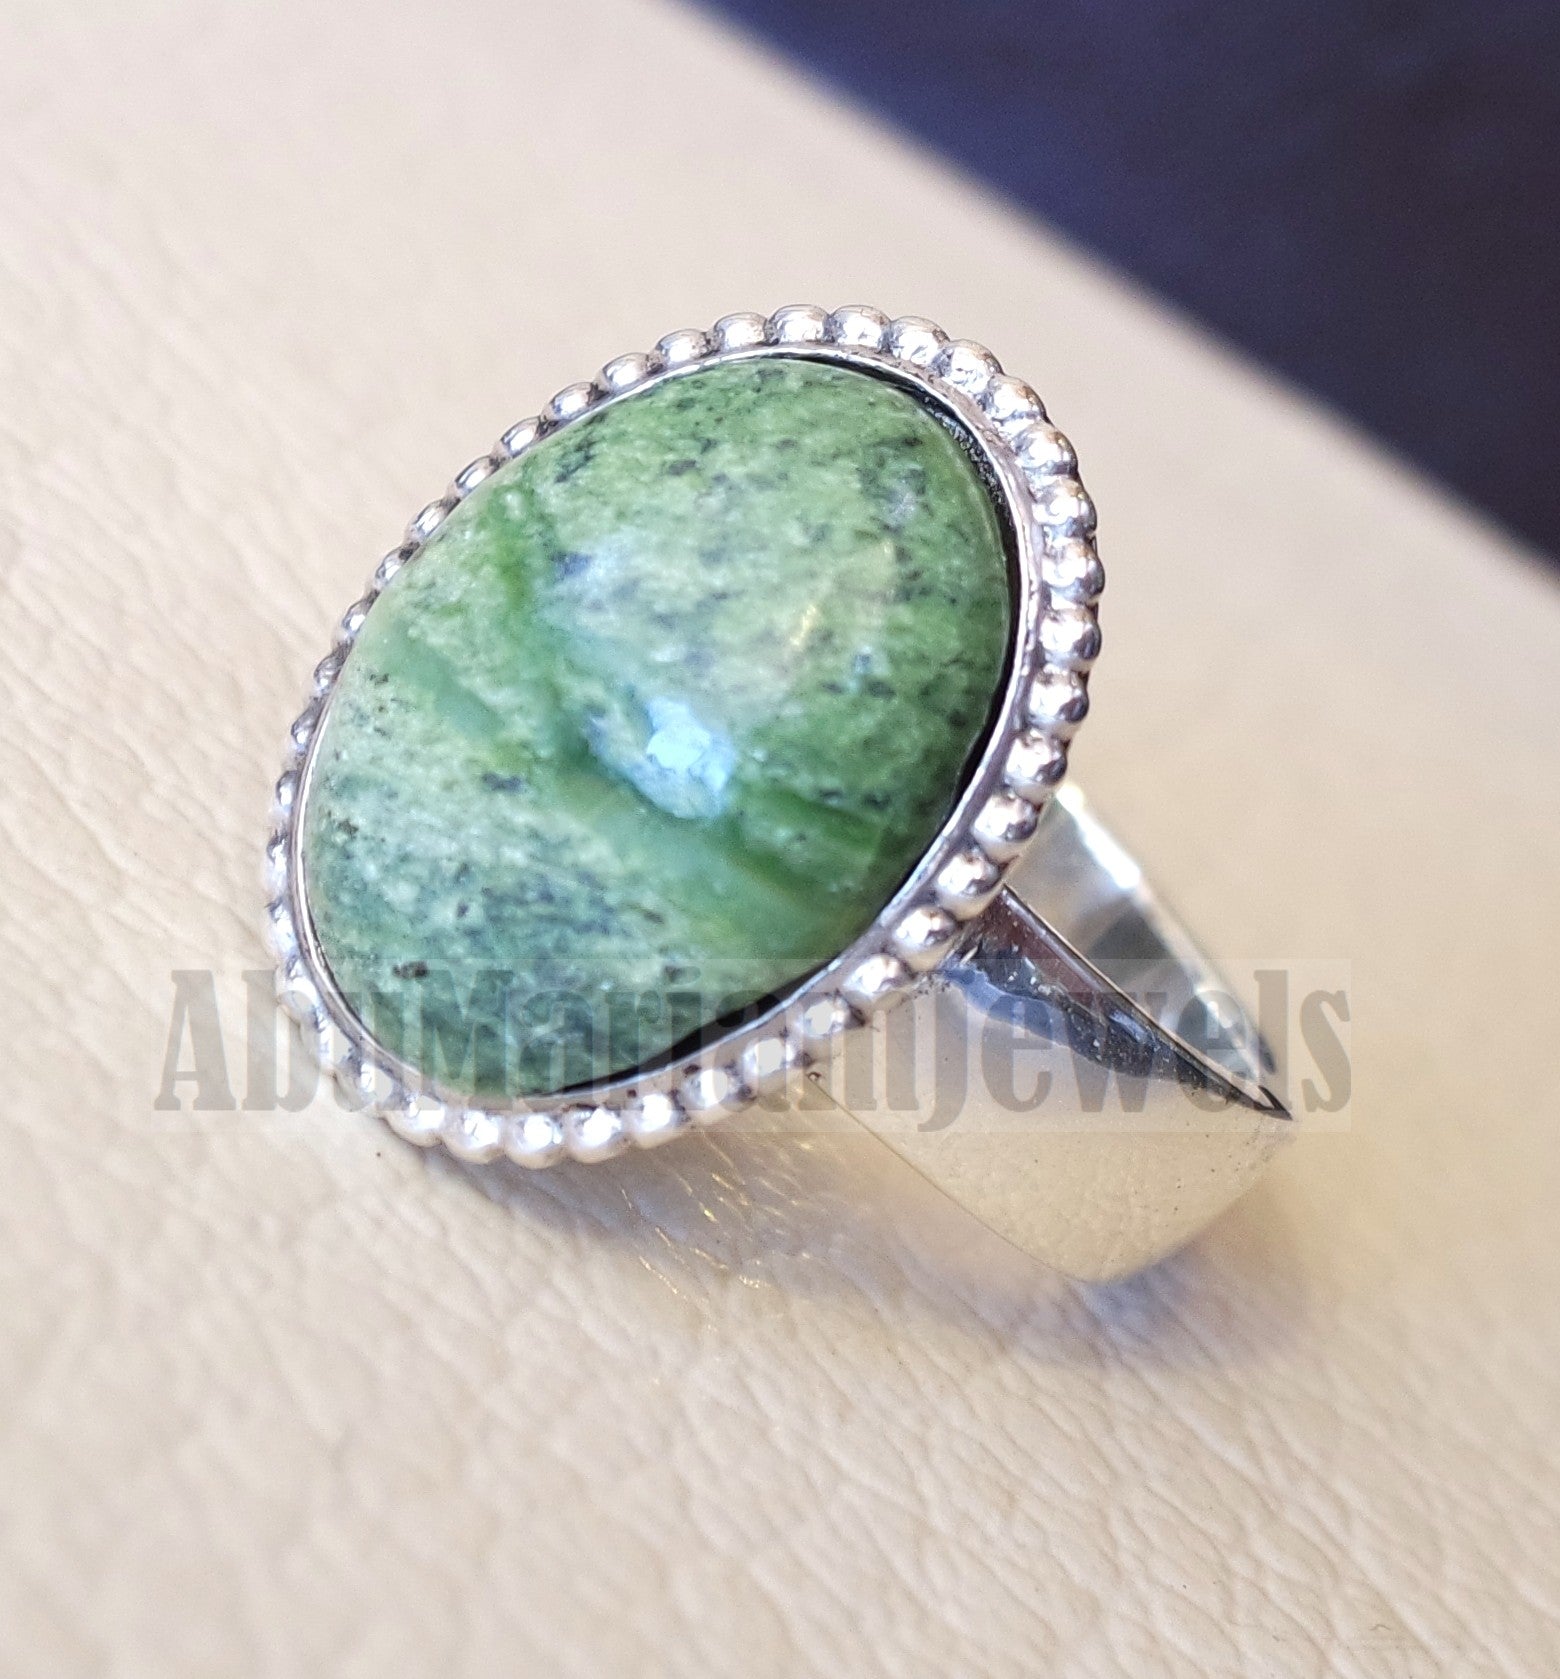 Pinkie men or women ring green Swiss opal skin touching stone sterling silver 925 all sizes high quality natural oval cabochon stone